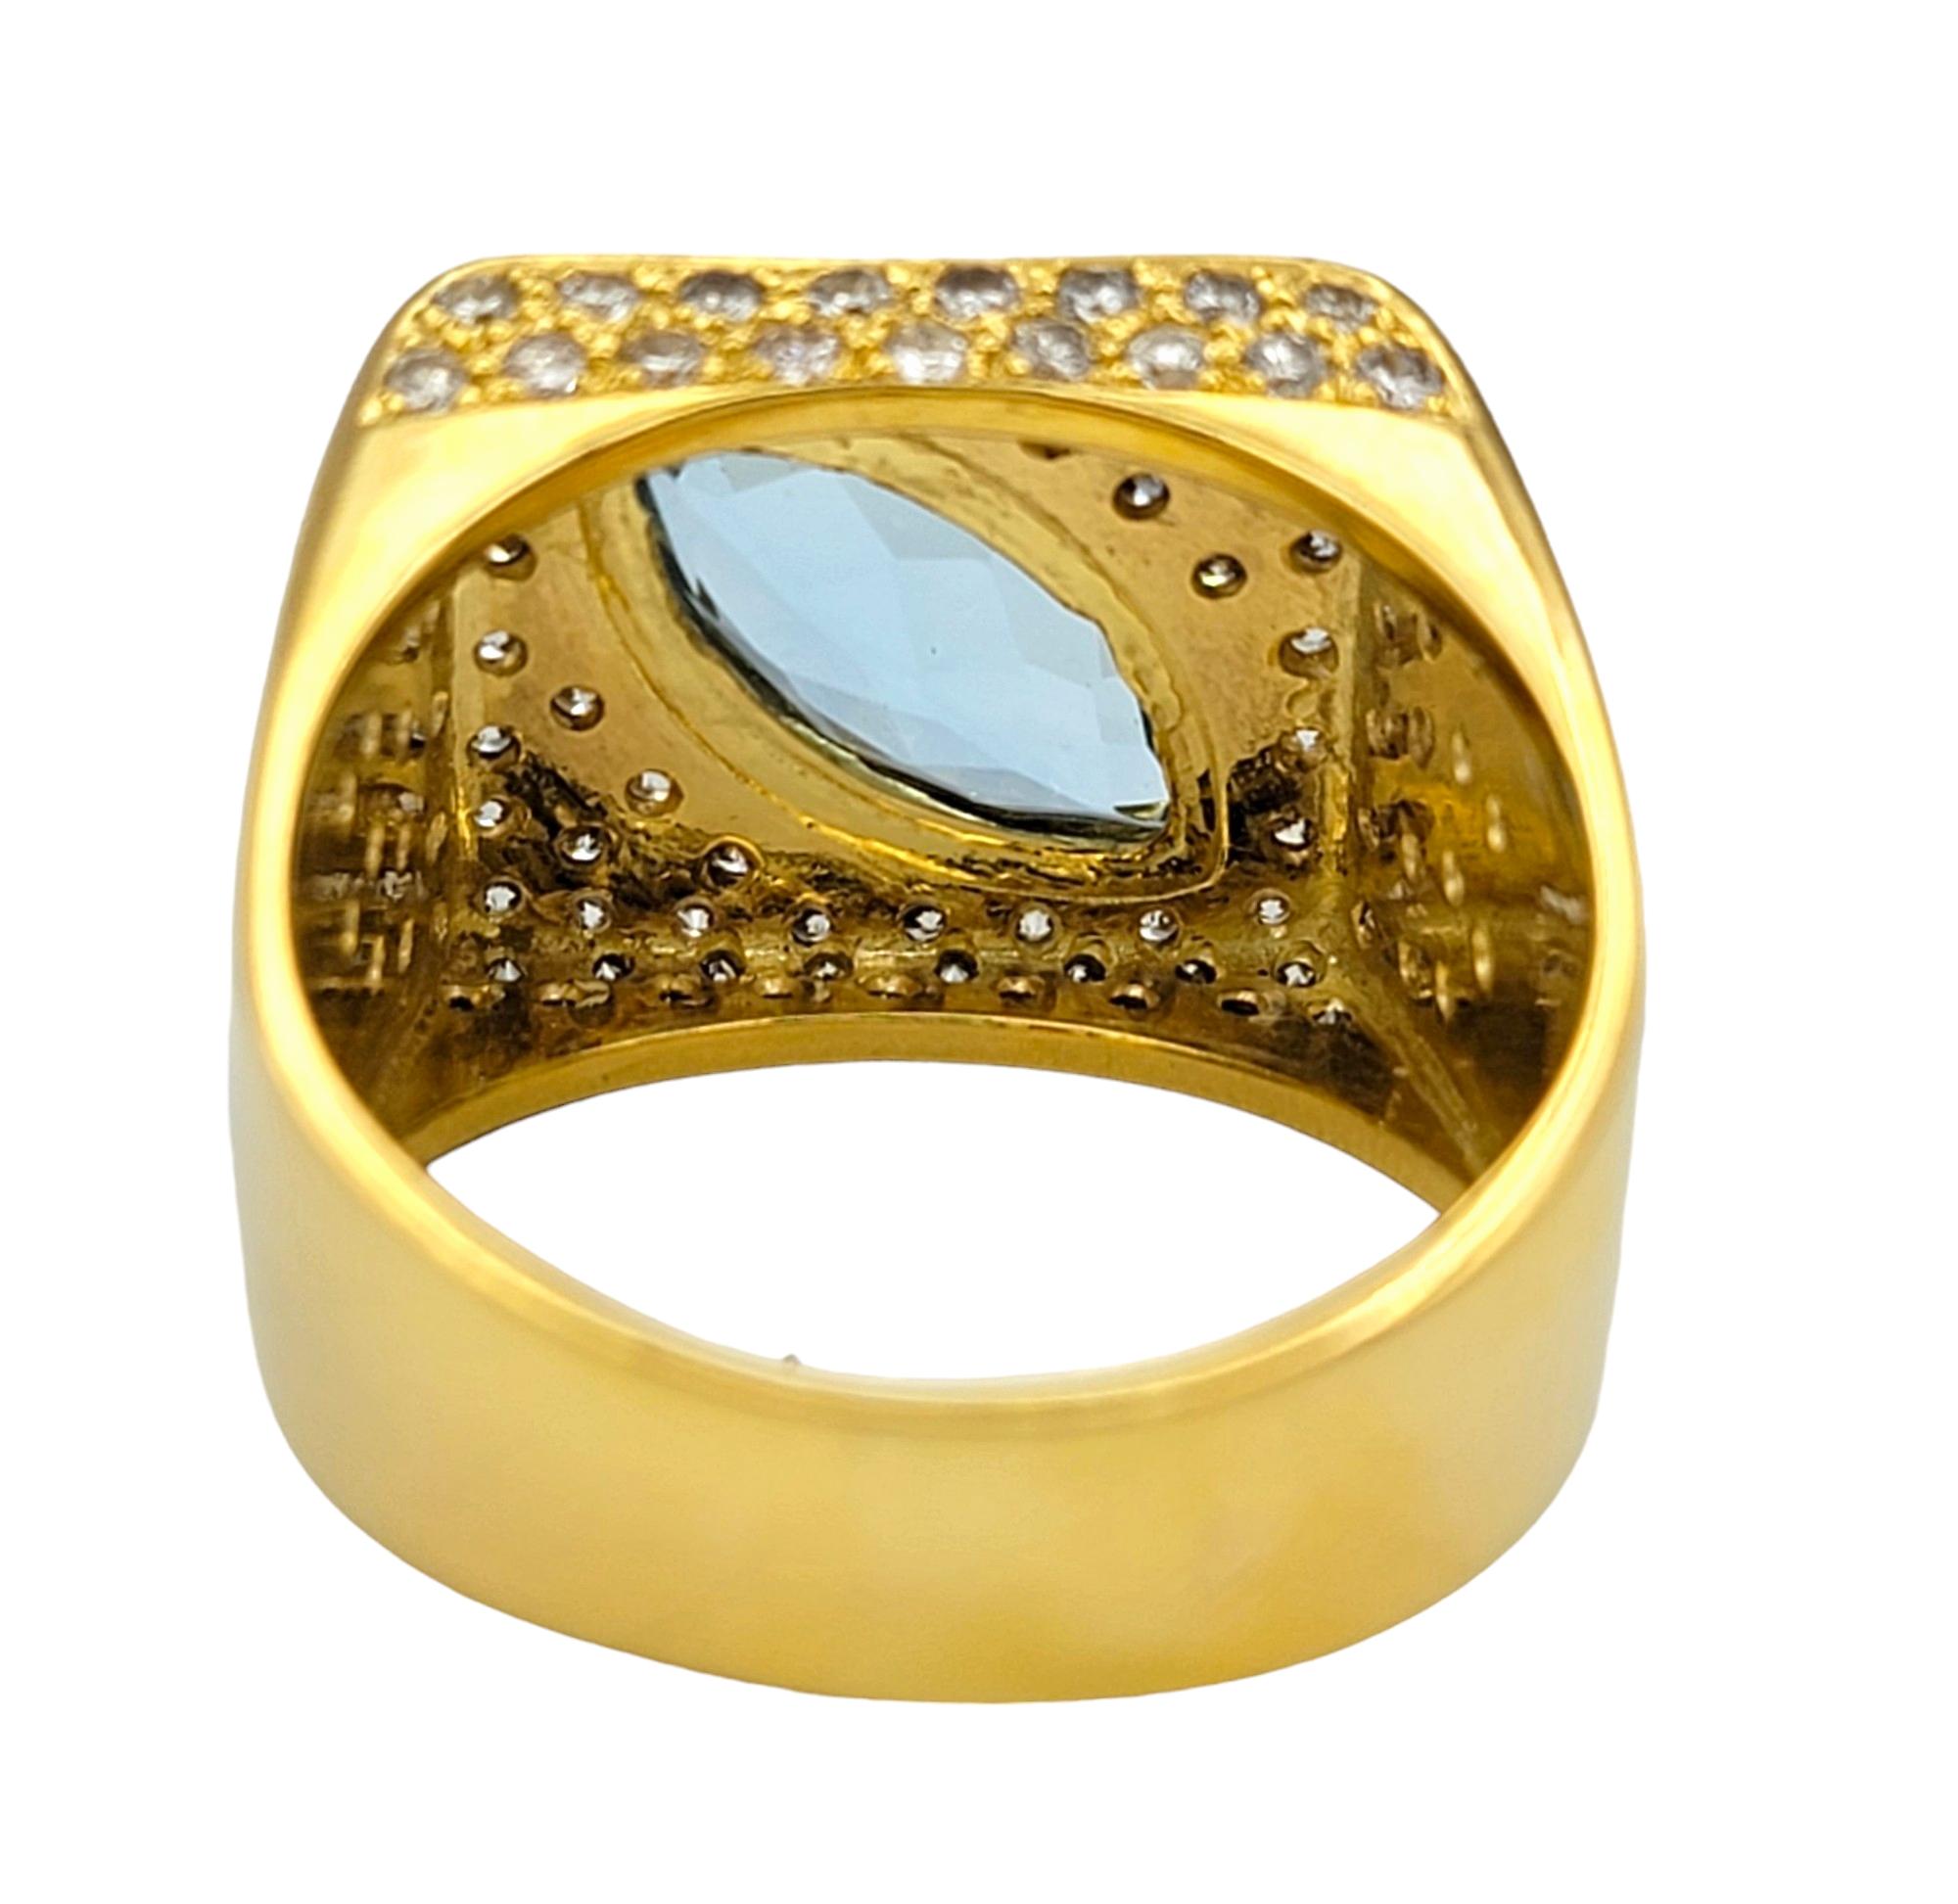 Contemporary Sophie d'Agon Marquise Cut Aquamarine & Diamond Cocktail Ring in 18K Yellow Gold For Sale